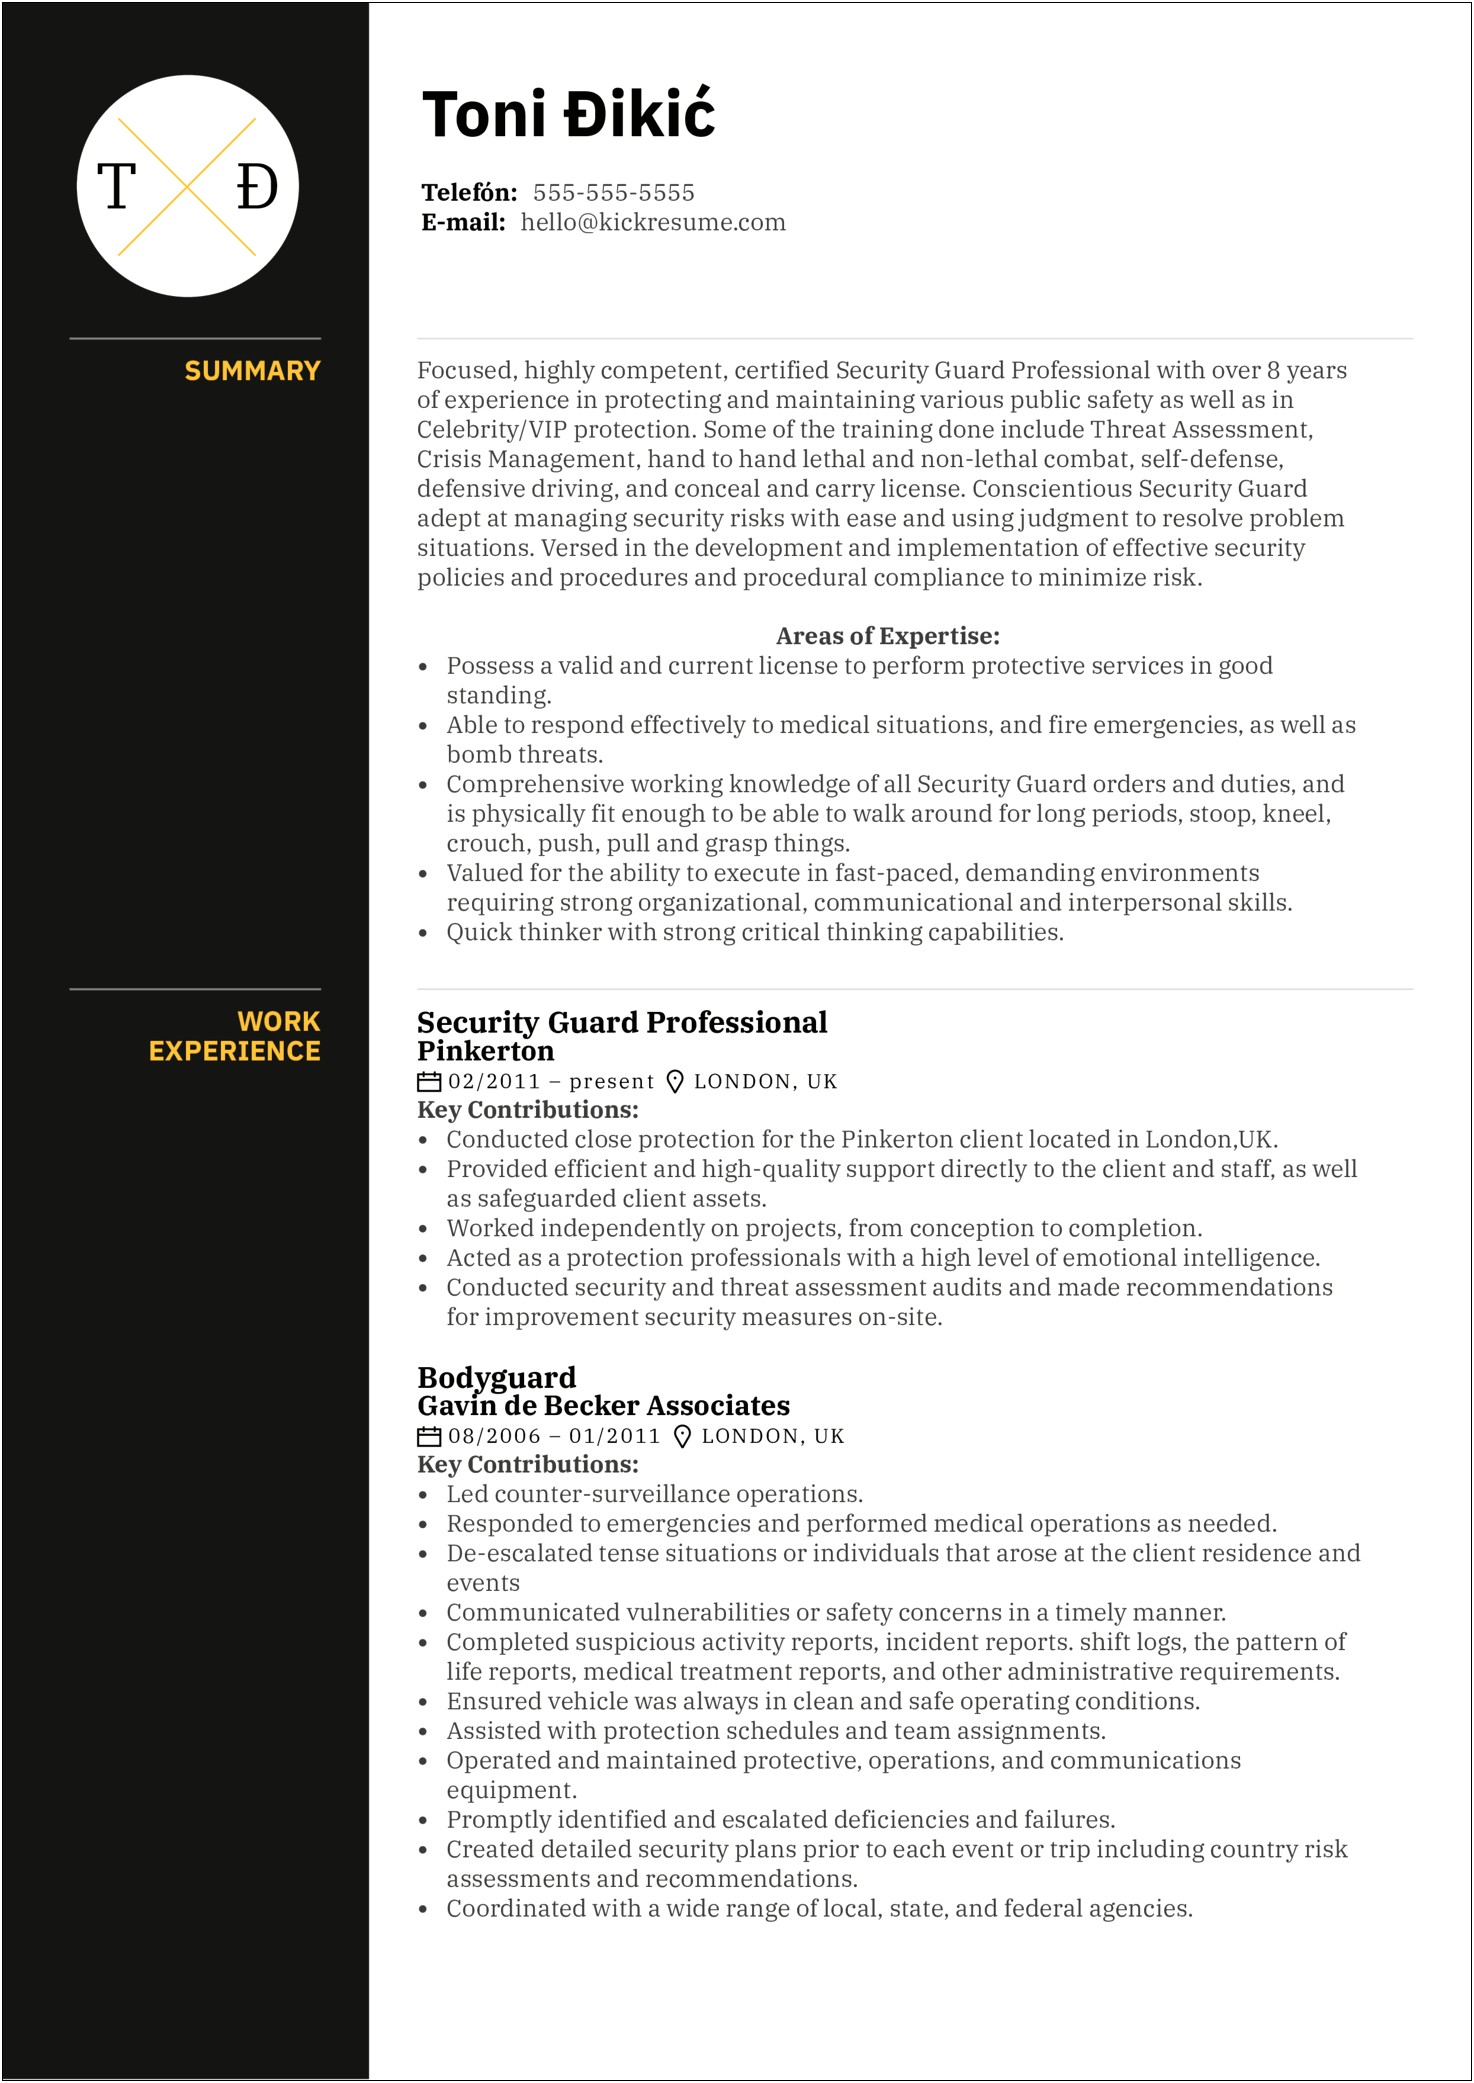 Summary Of Qualifications For Security Officer Resume